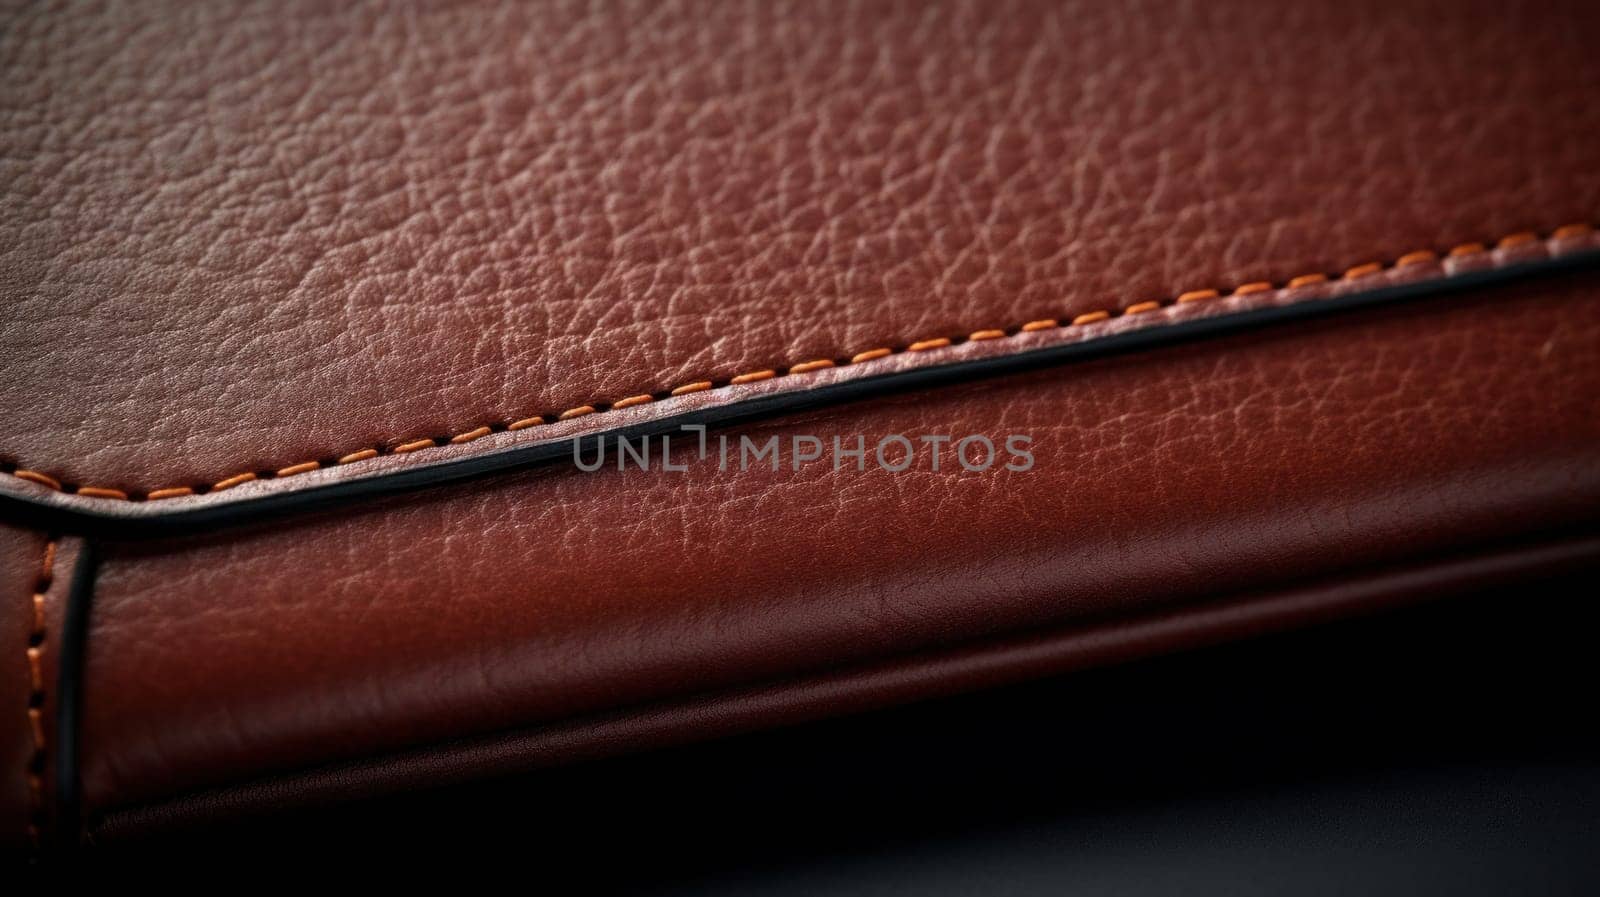 A close up of a brown leather wallet with stitching on it